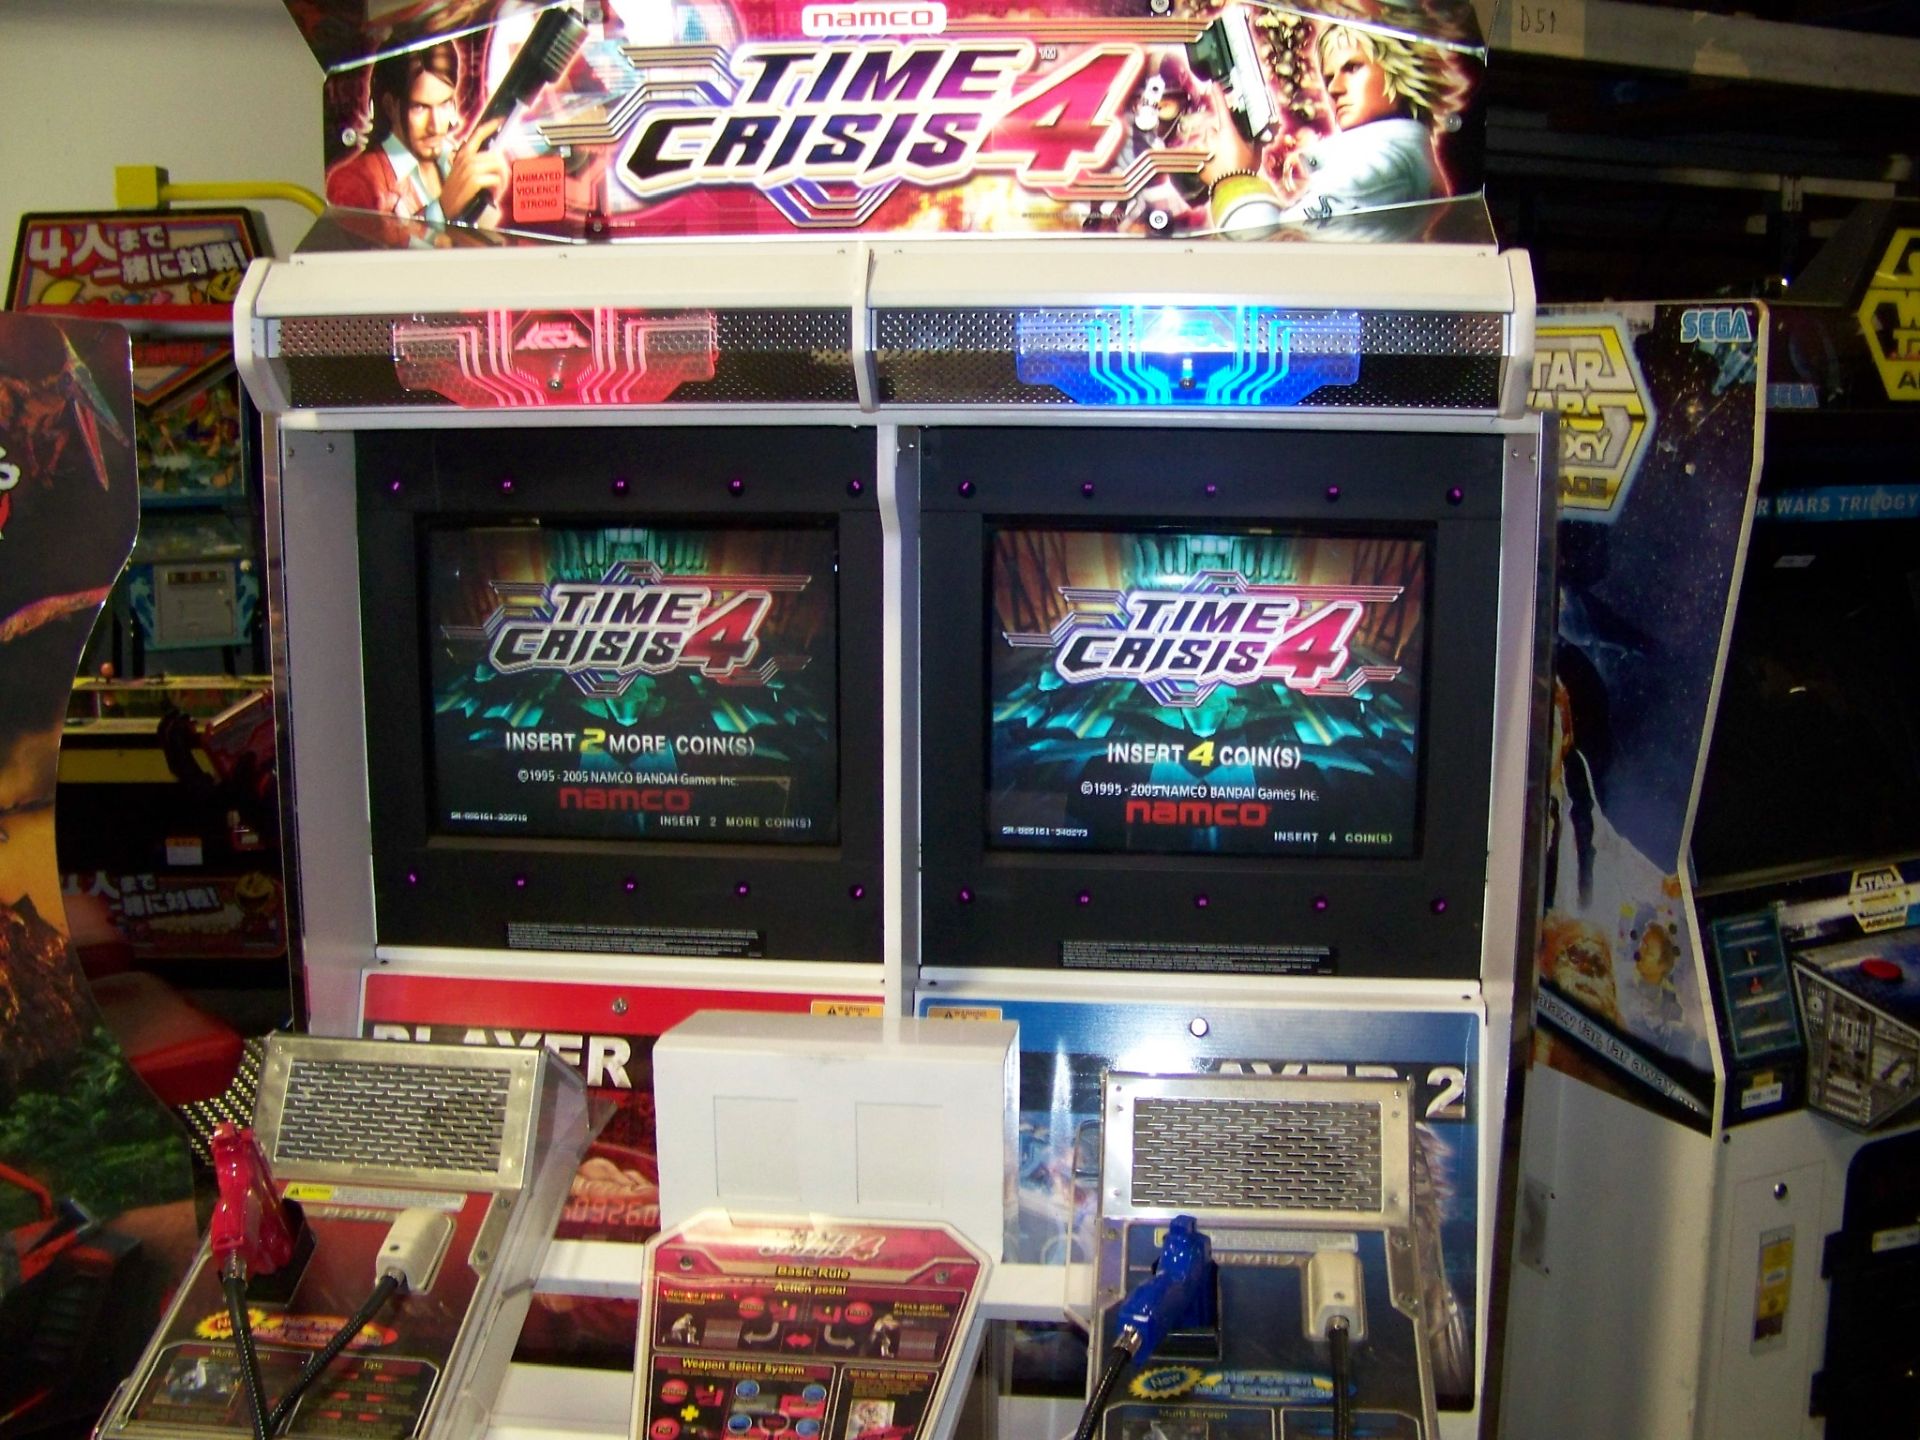 TIME CRISIS 4 TWIN SHOOTER ARCADE GAME NAMCO Item is in used condition. Evidence of wear and - Image 2 of 9